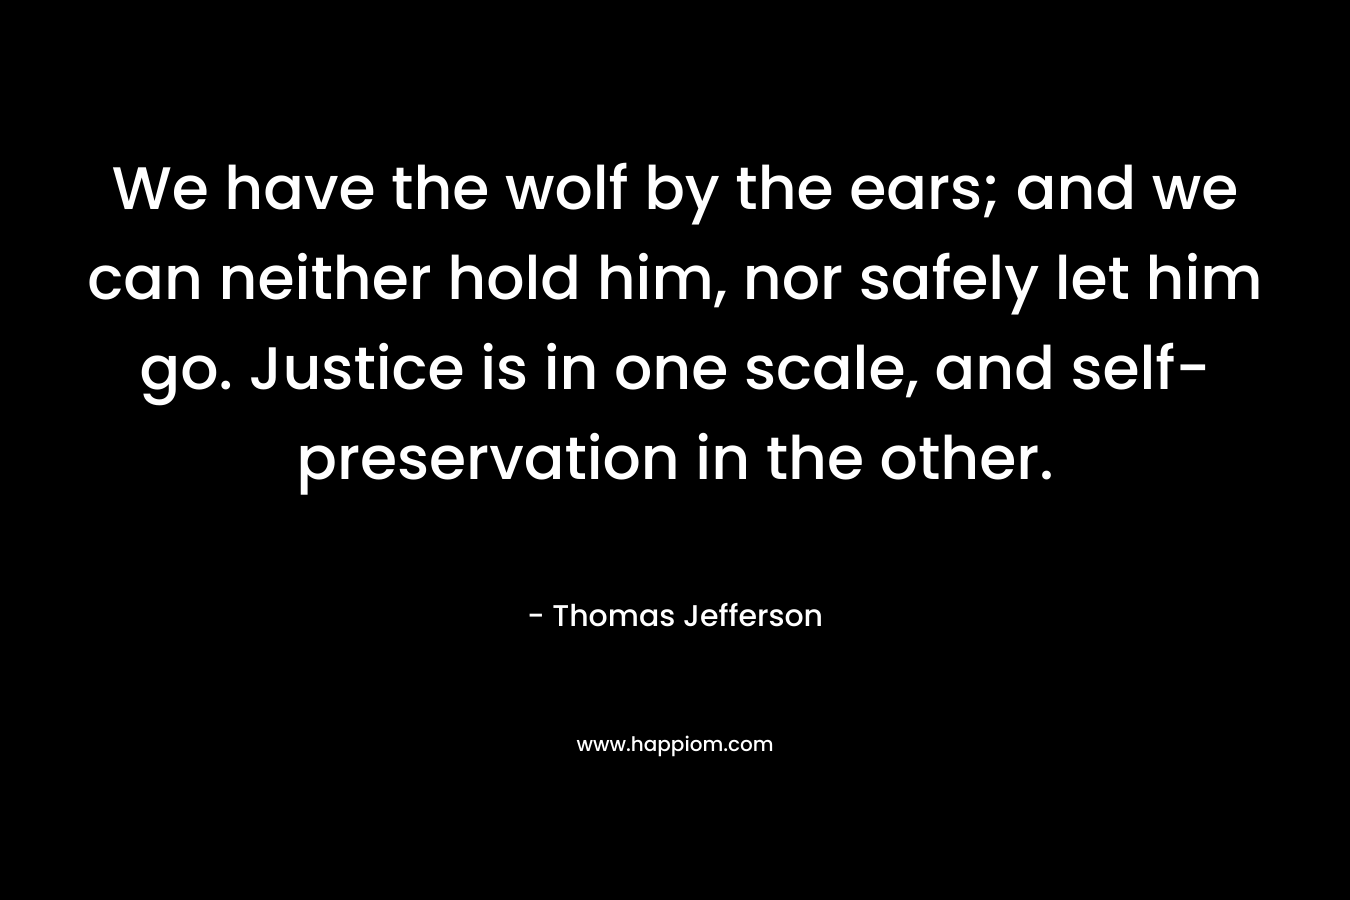 We have the wolf by the ears; and we can neither hold him, nor safely let him go. Justice is in one scale, and self-preservation in the other.